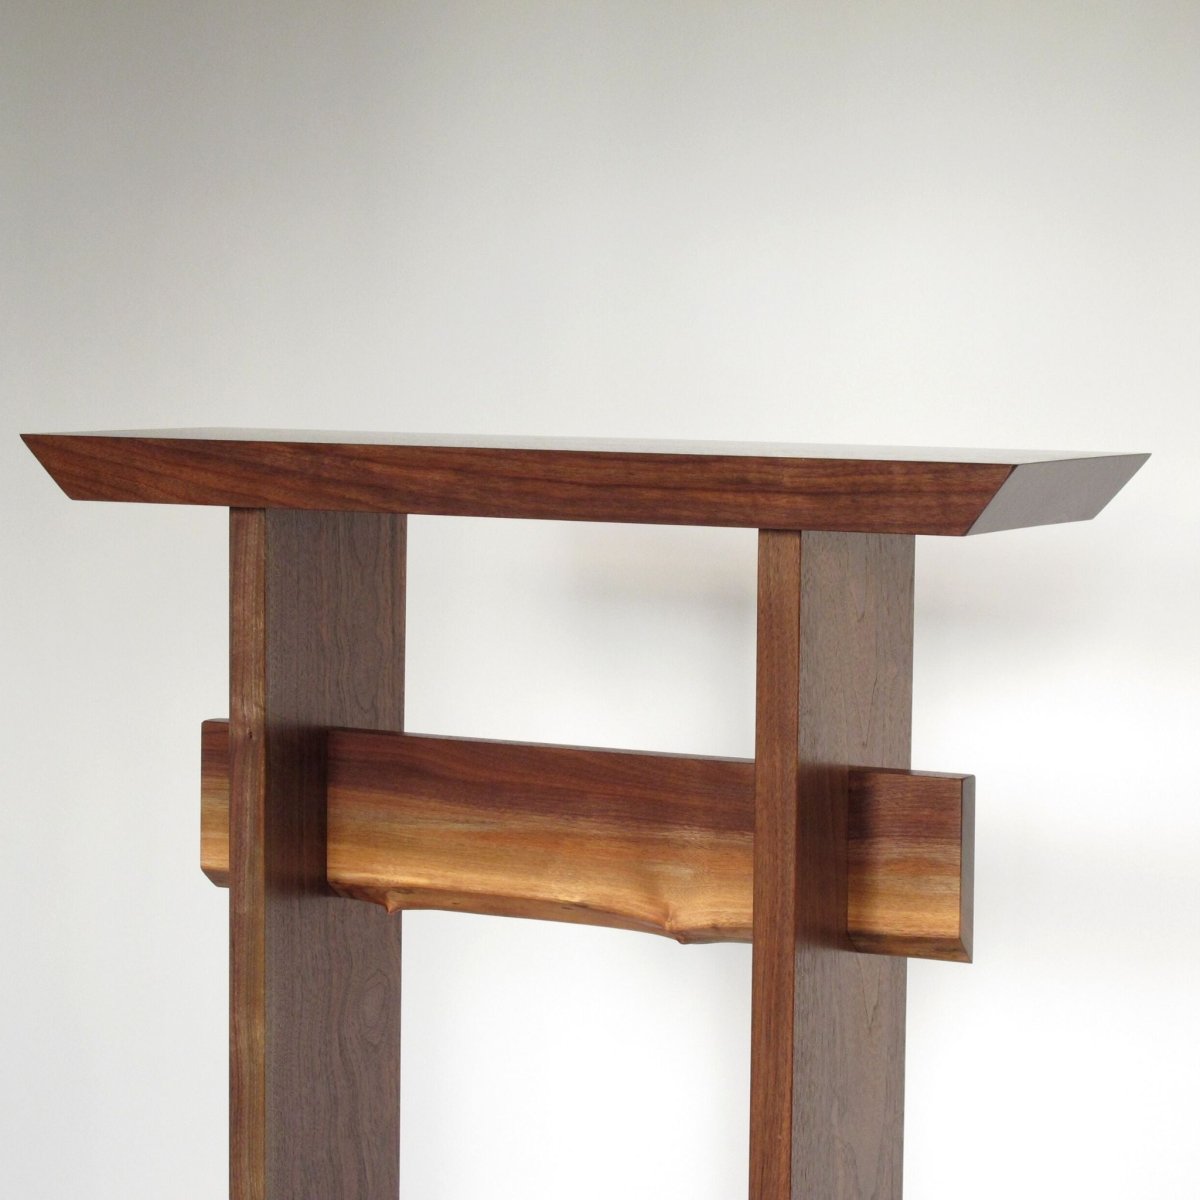 a walnut hall table with live edge table stretcher by Mokuzai Furniture